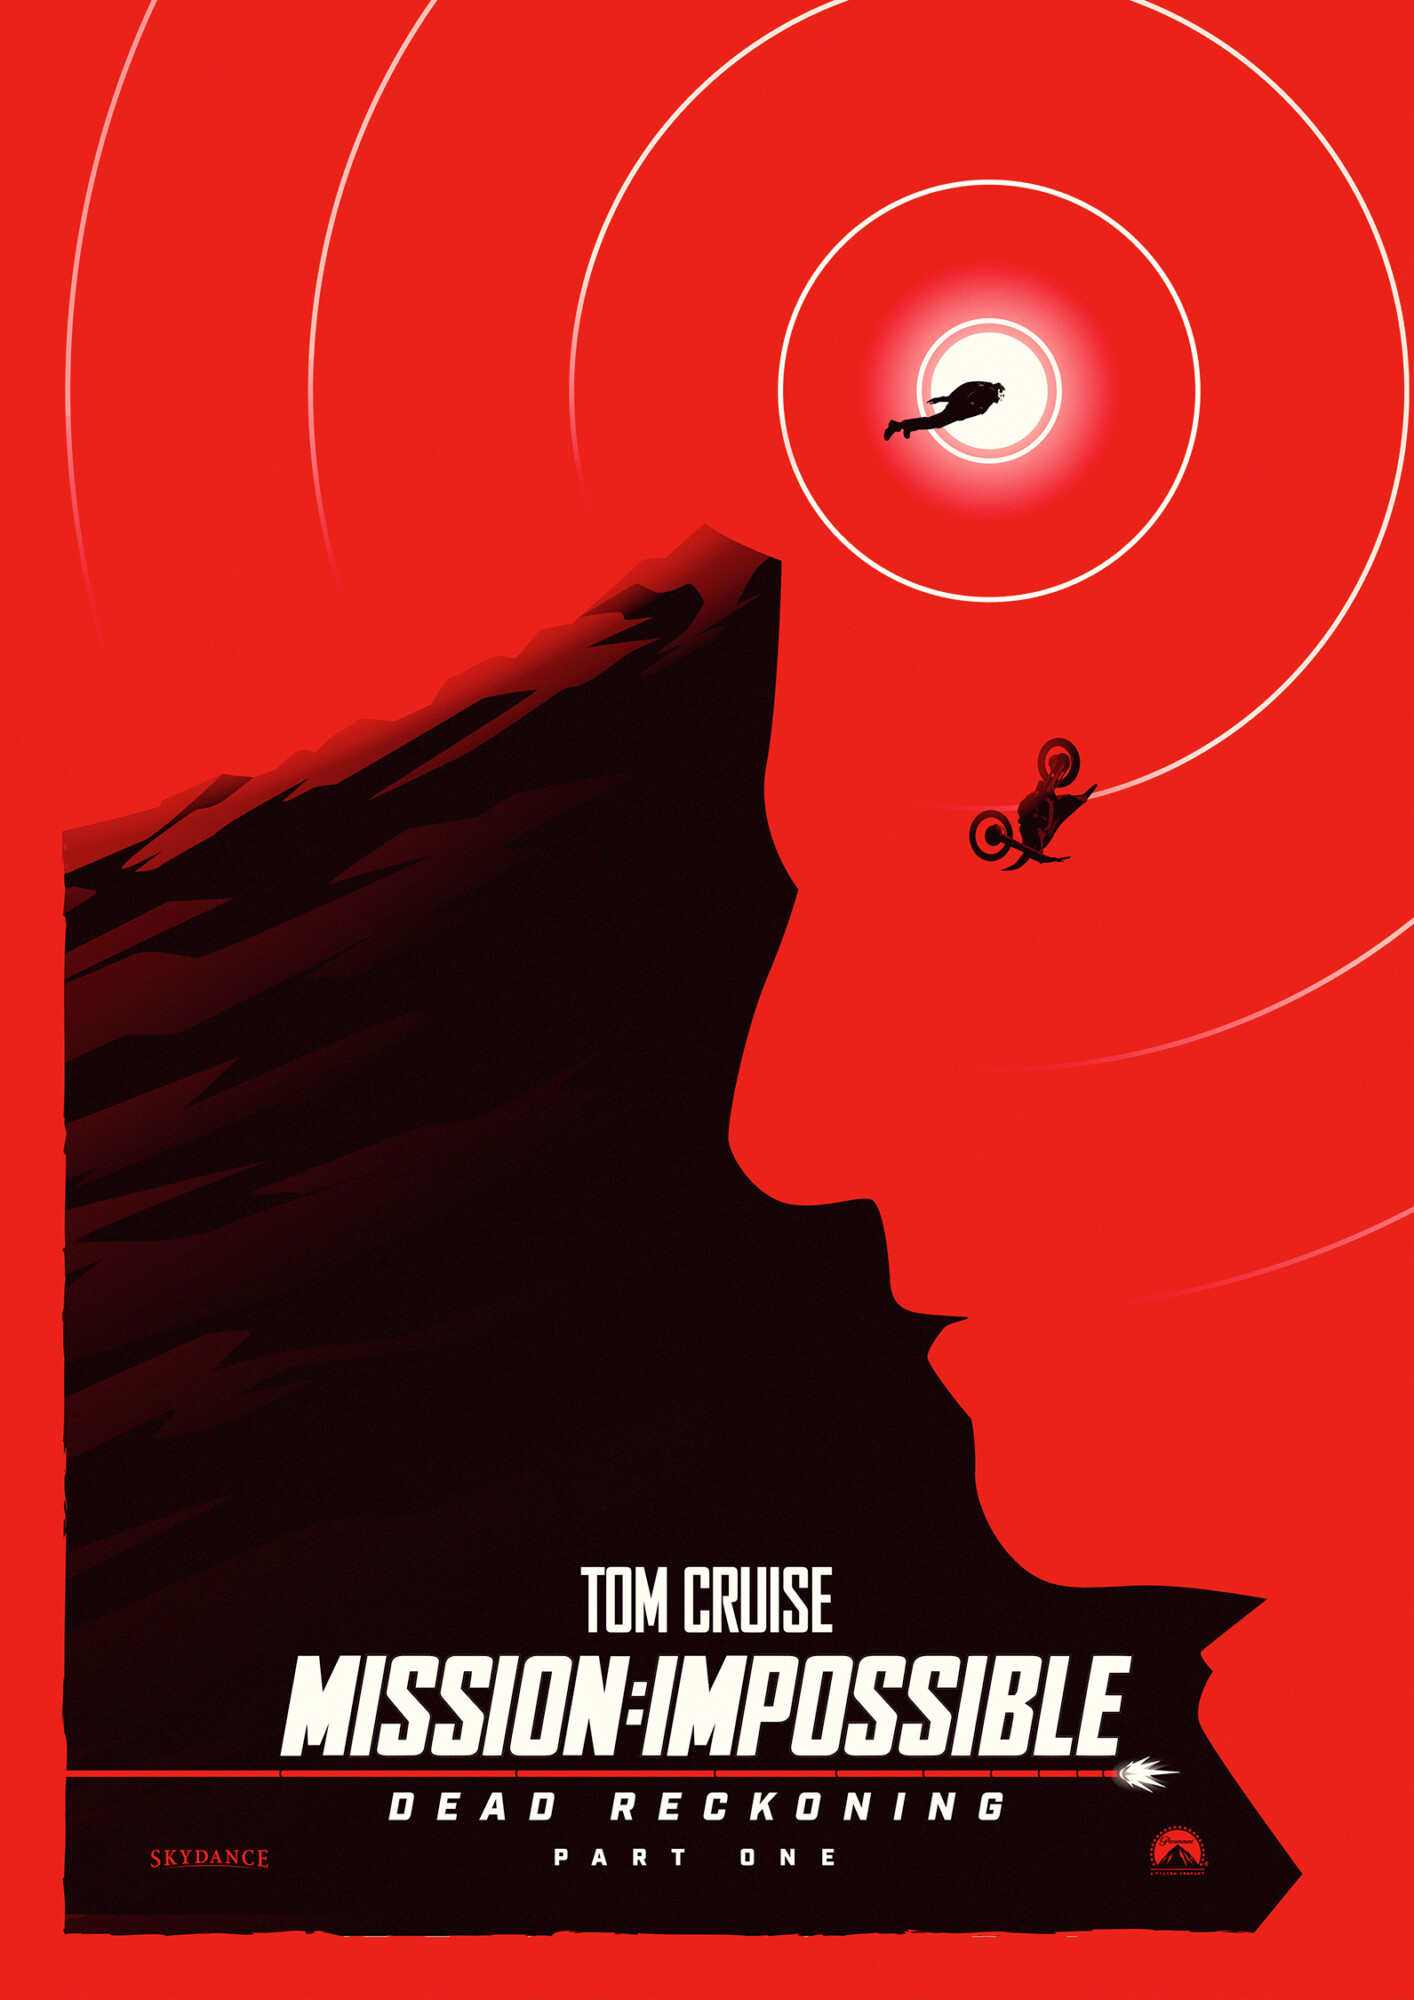 MISSION IMPOSSIBLE: DEAD RECKONING Poster Art